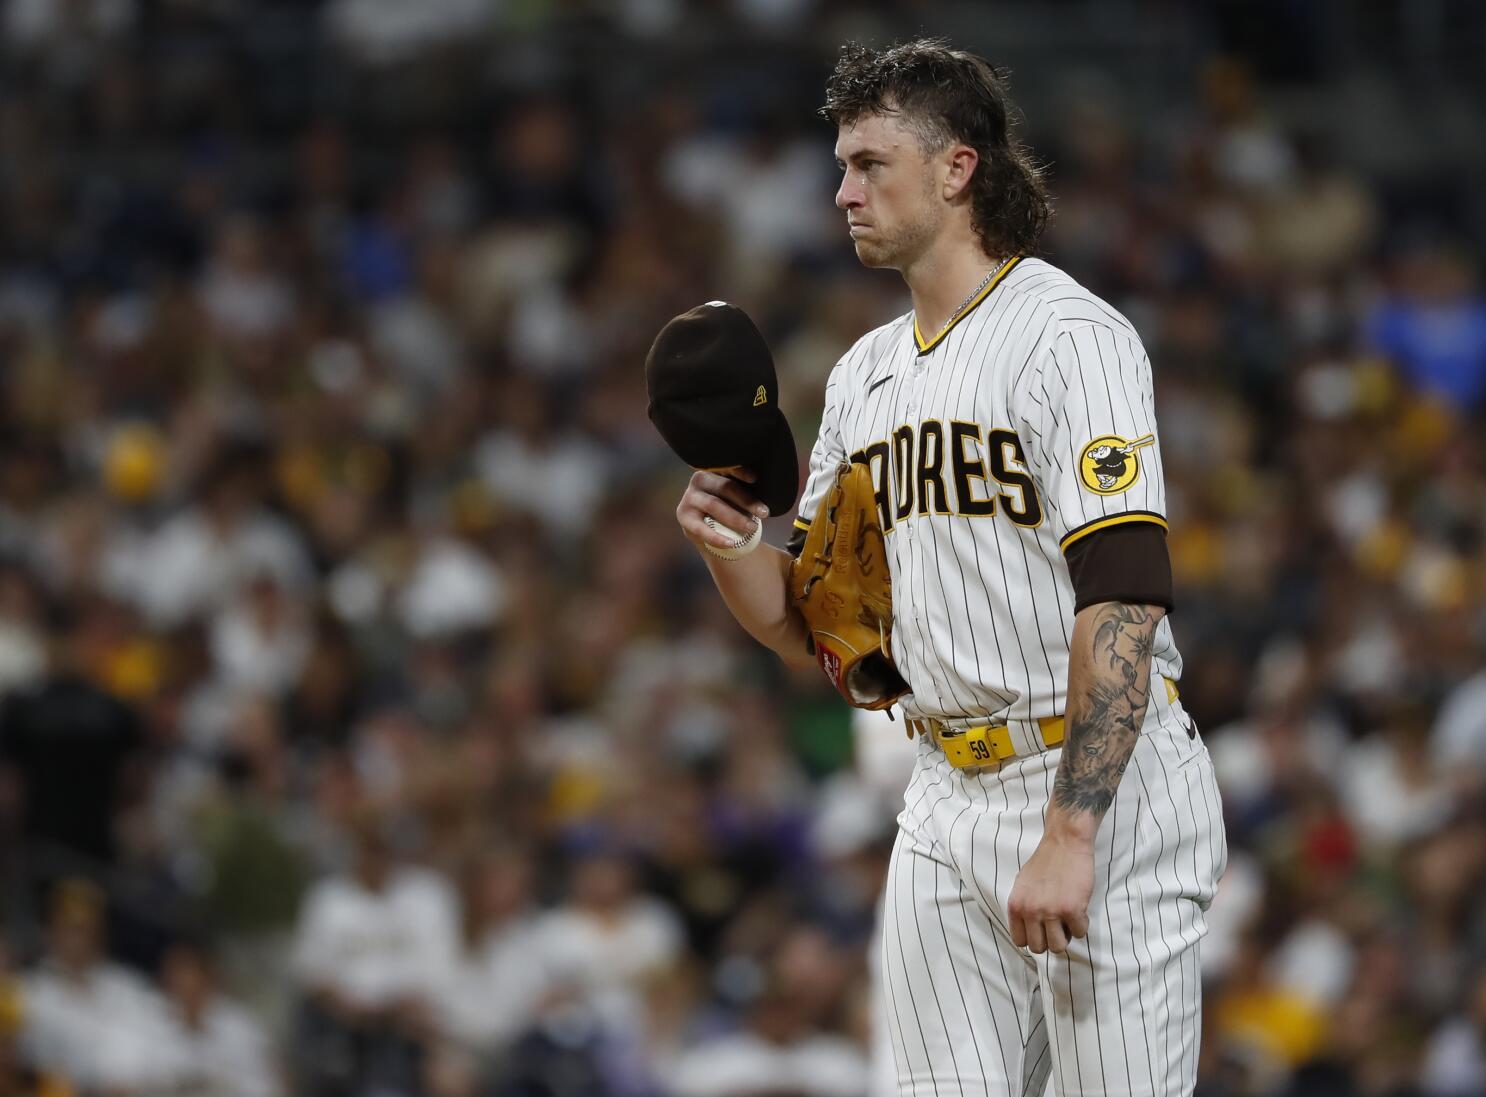 What went wrong with Padres' Paddack?